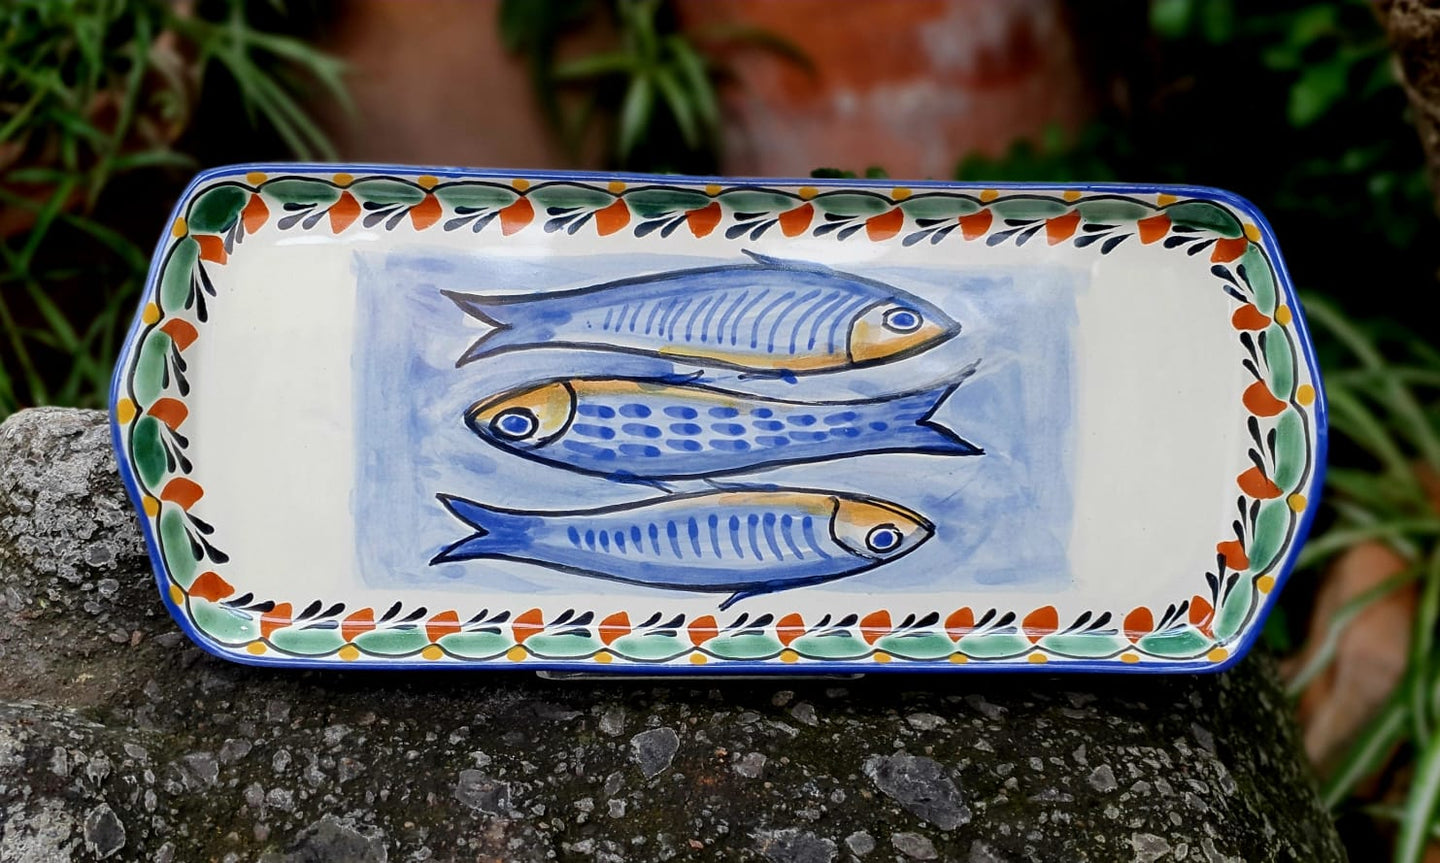 Sardines Tray 13.4in x 5.5in W MultiColors